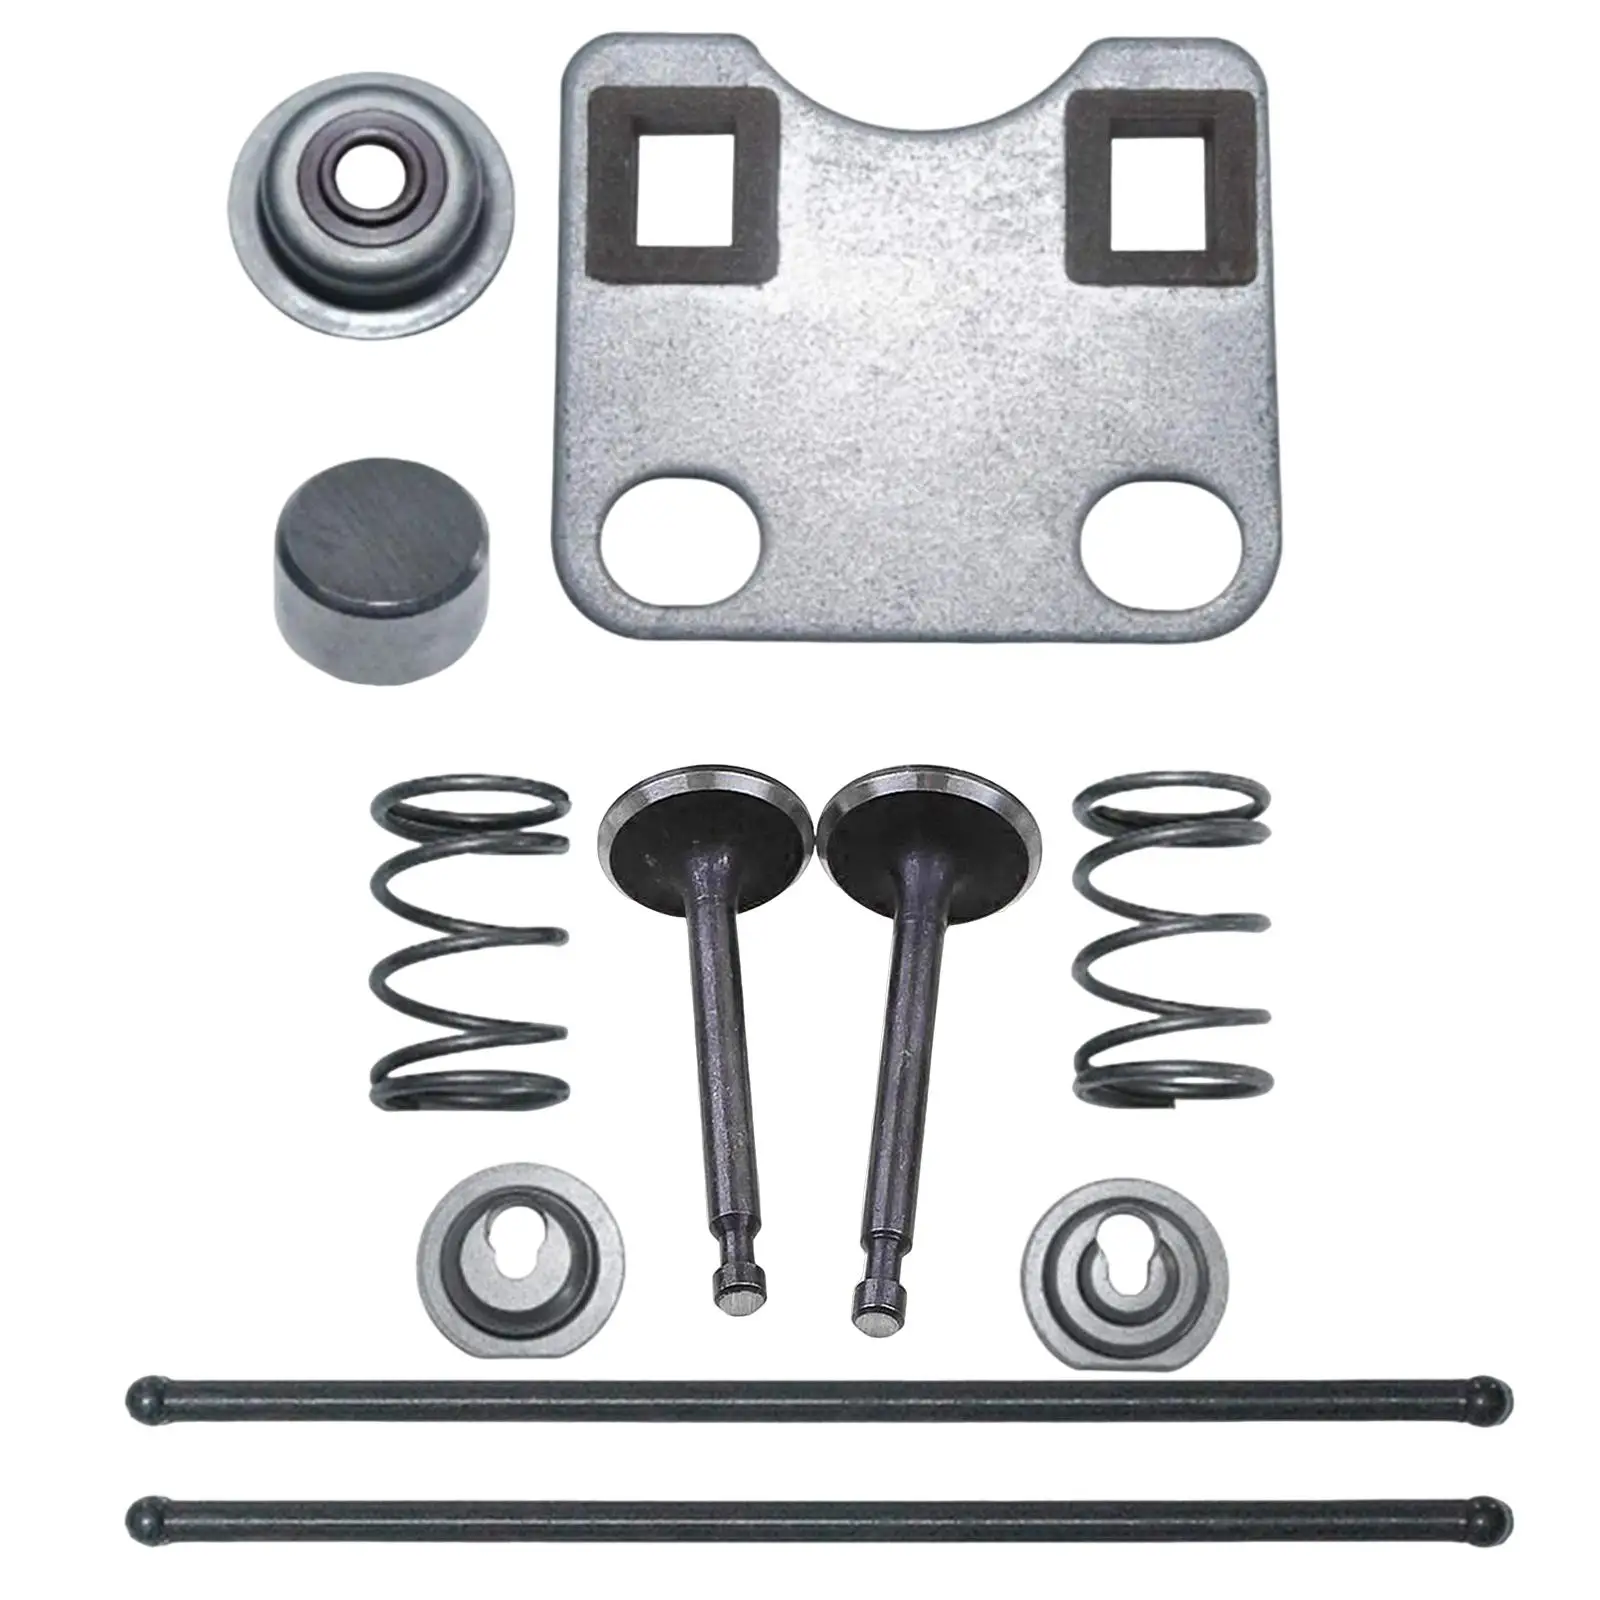 11x Engine Intake Exhaust Valve Gasket Kit Accessories Guide Plate Parts 14791-Ze1-010 Push Rod Silver for Honda Gx160 Gx200